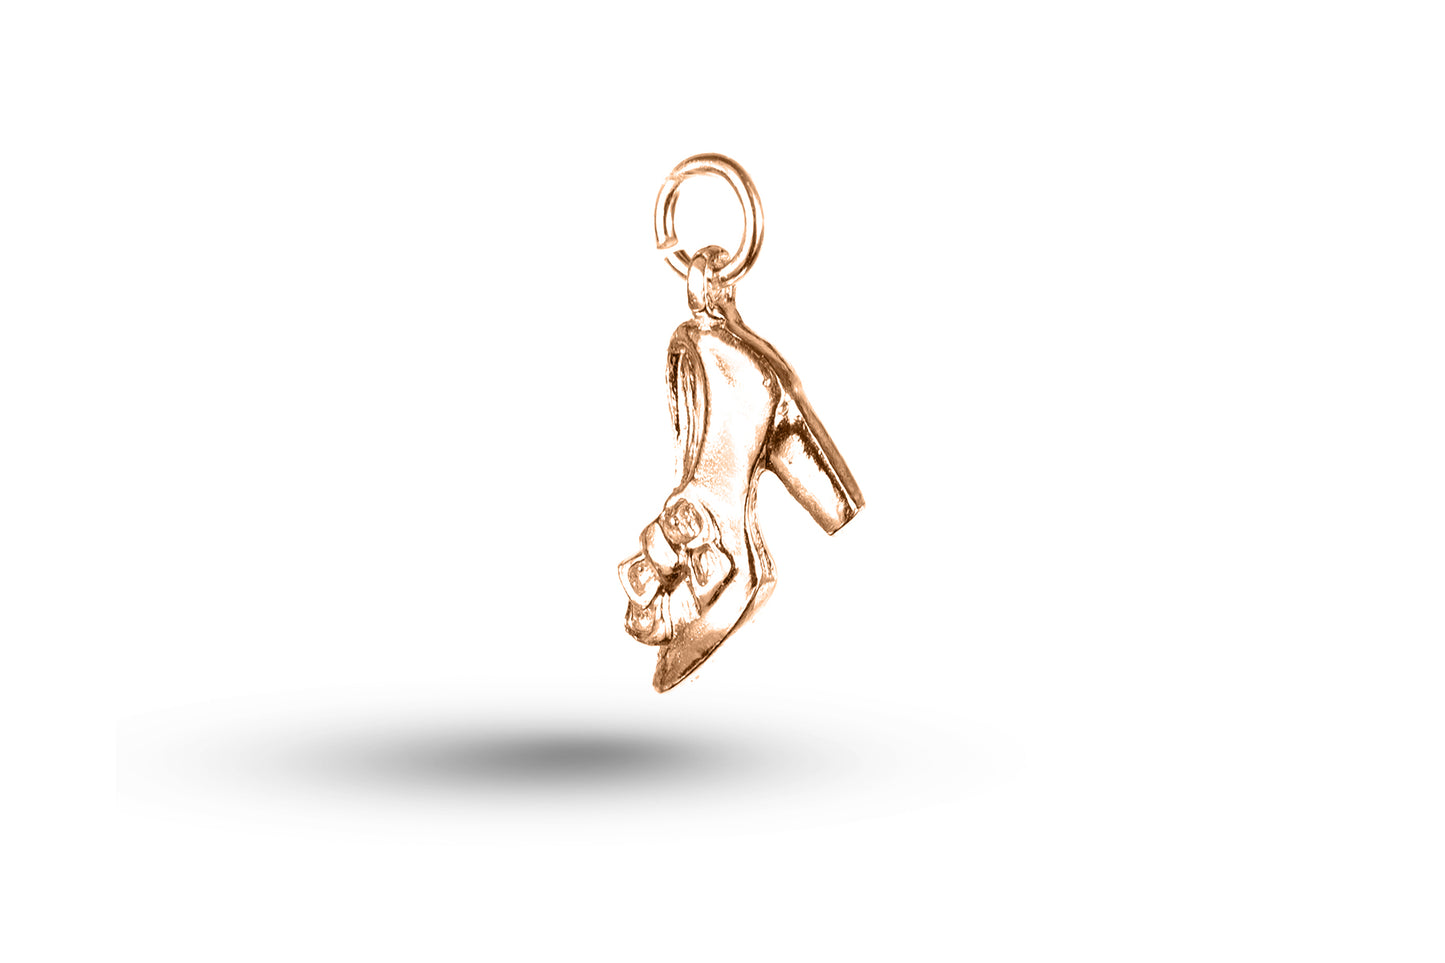 Rose gold Ladies Heeled Shoe with Bow charm.